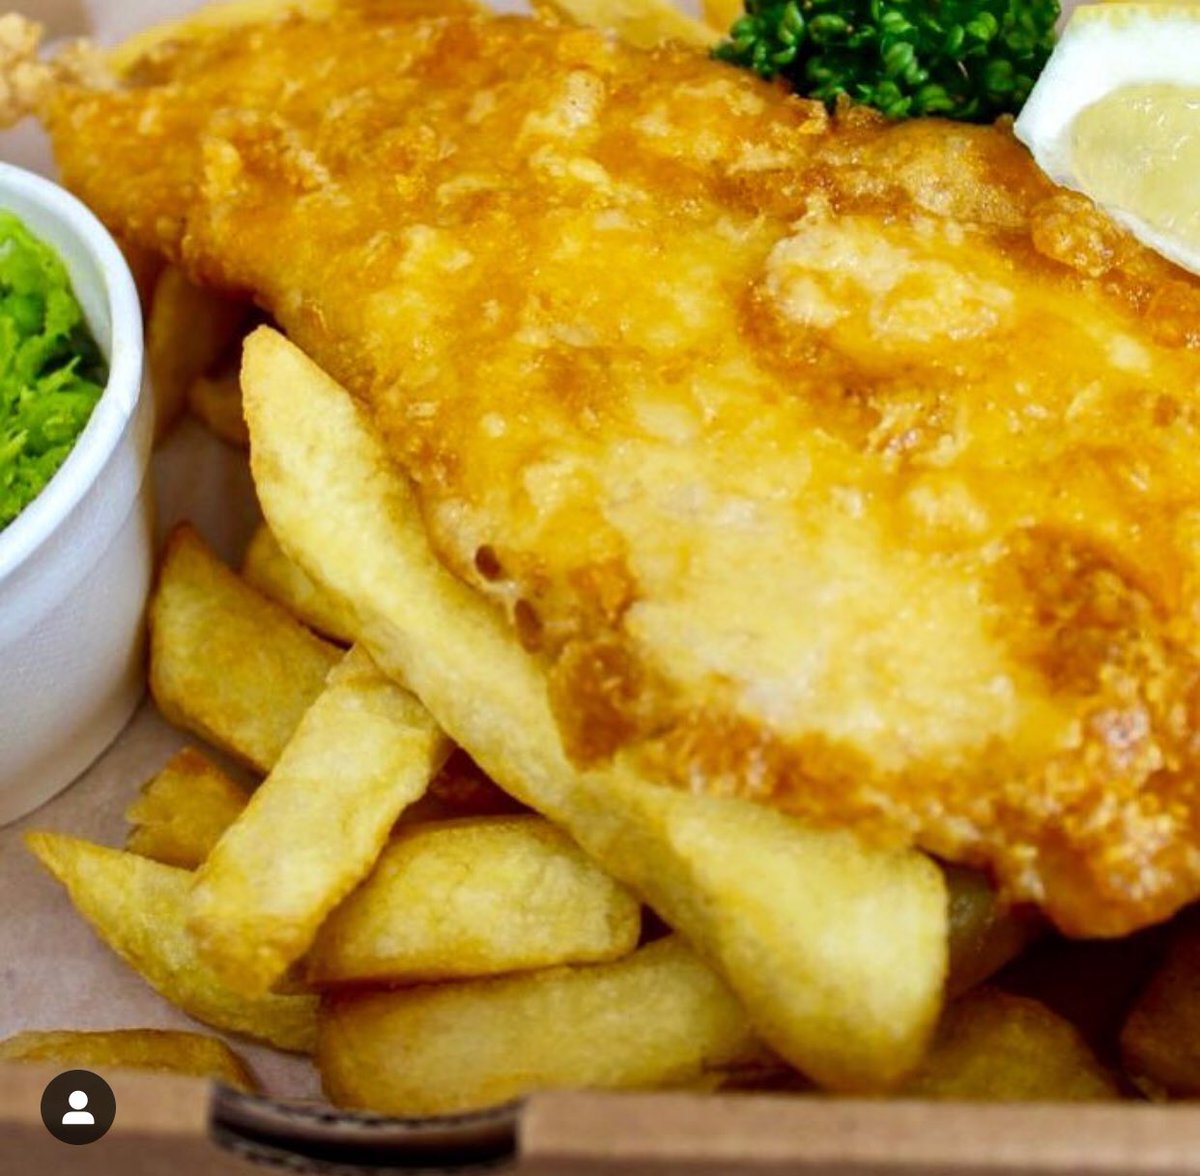 Fish and chips lunch today ... always fresh and delicious 🌱🍋 were here all day long have a wonderful day